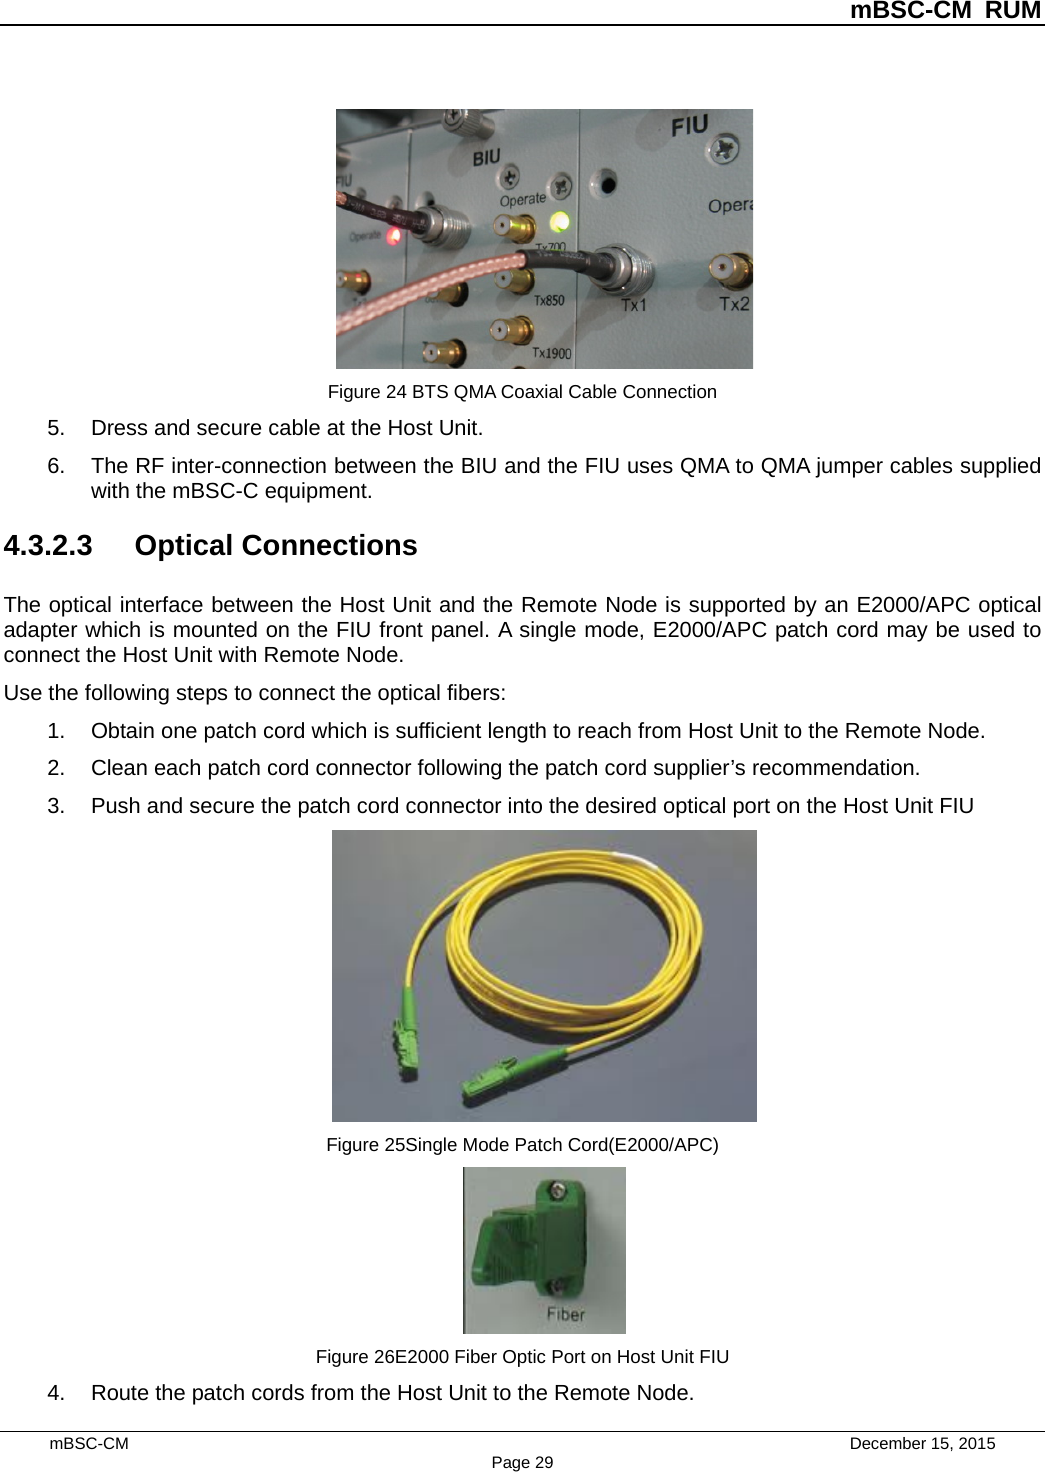          mBSC-CM RUM   mBSC-CM                                 December 15, 2015 Page 29  Figure 24 BTS QMA Coaxial Cable Connection 5. Dress and secure cable at the Host Unit. 6. The RF inter-connection between the BIU and the FIU uses QMA to QMA jumper cables supplied with the mBSC-C equipment. 4.3.2.3 Optical Connections The optical interface between the Host Unit and the Remote Node is supported by an E2000/APC optical adapter which is mounted on the FIU front panel. A single mode, E2000/APC patch cord may be used to connect the Host Unit with Remote Node. Use the following steps to connect the optical fibers: 1. Obtain one patch cord which is sufficient length to reach from Host Unit to the Remote Node. 2. Clean each patch cord connector following the patch cord supplier’s recommendation. 3. Push and secure the patch cord connector into the desired optical port on the Host Unit FIU  Figure 25Single Mode Patch Cord(E2000/APC)  Figure 26E2000 Fiber Optic Port on Host Unit FIU 4. Route the patch cords from the Host Unit to the Remote Node. 